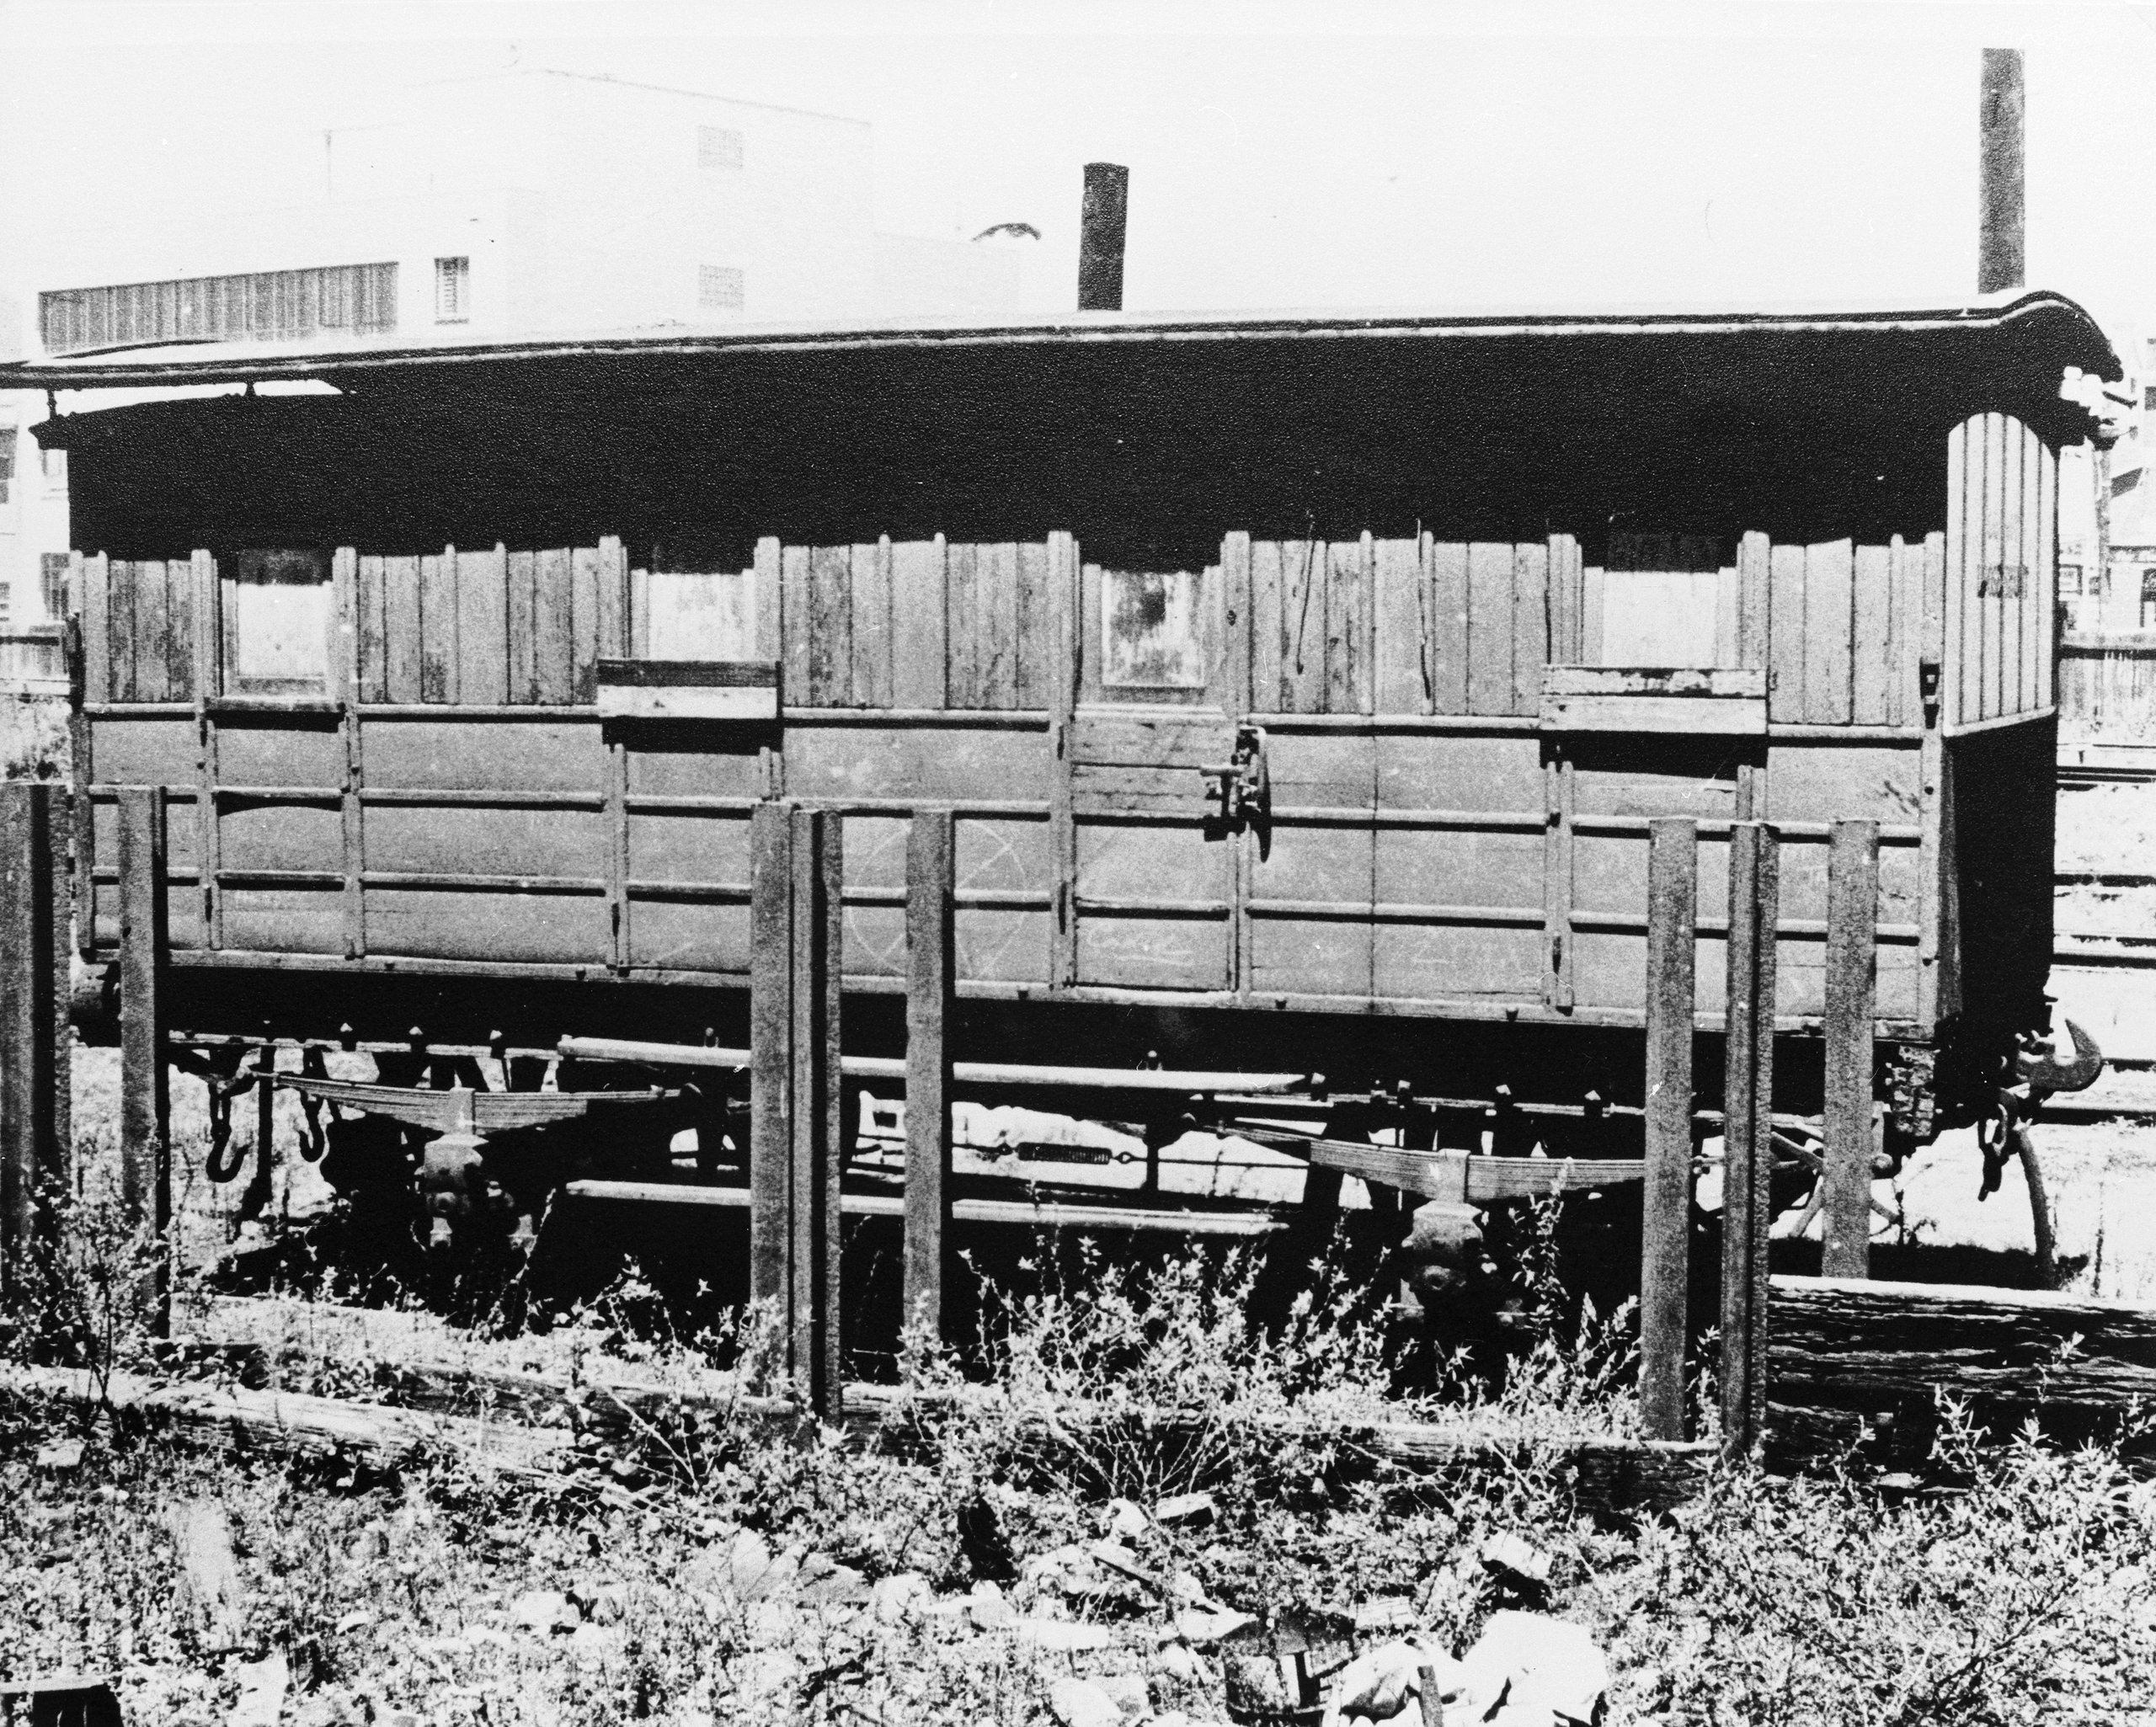 Second class railway carriage used on first railway in NSW